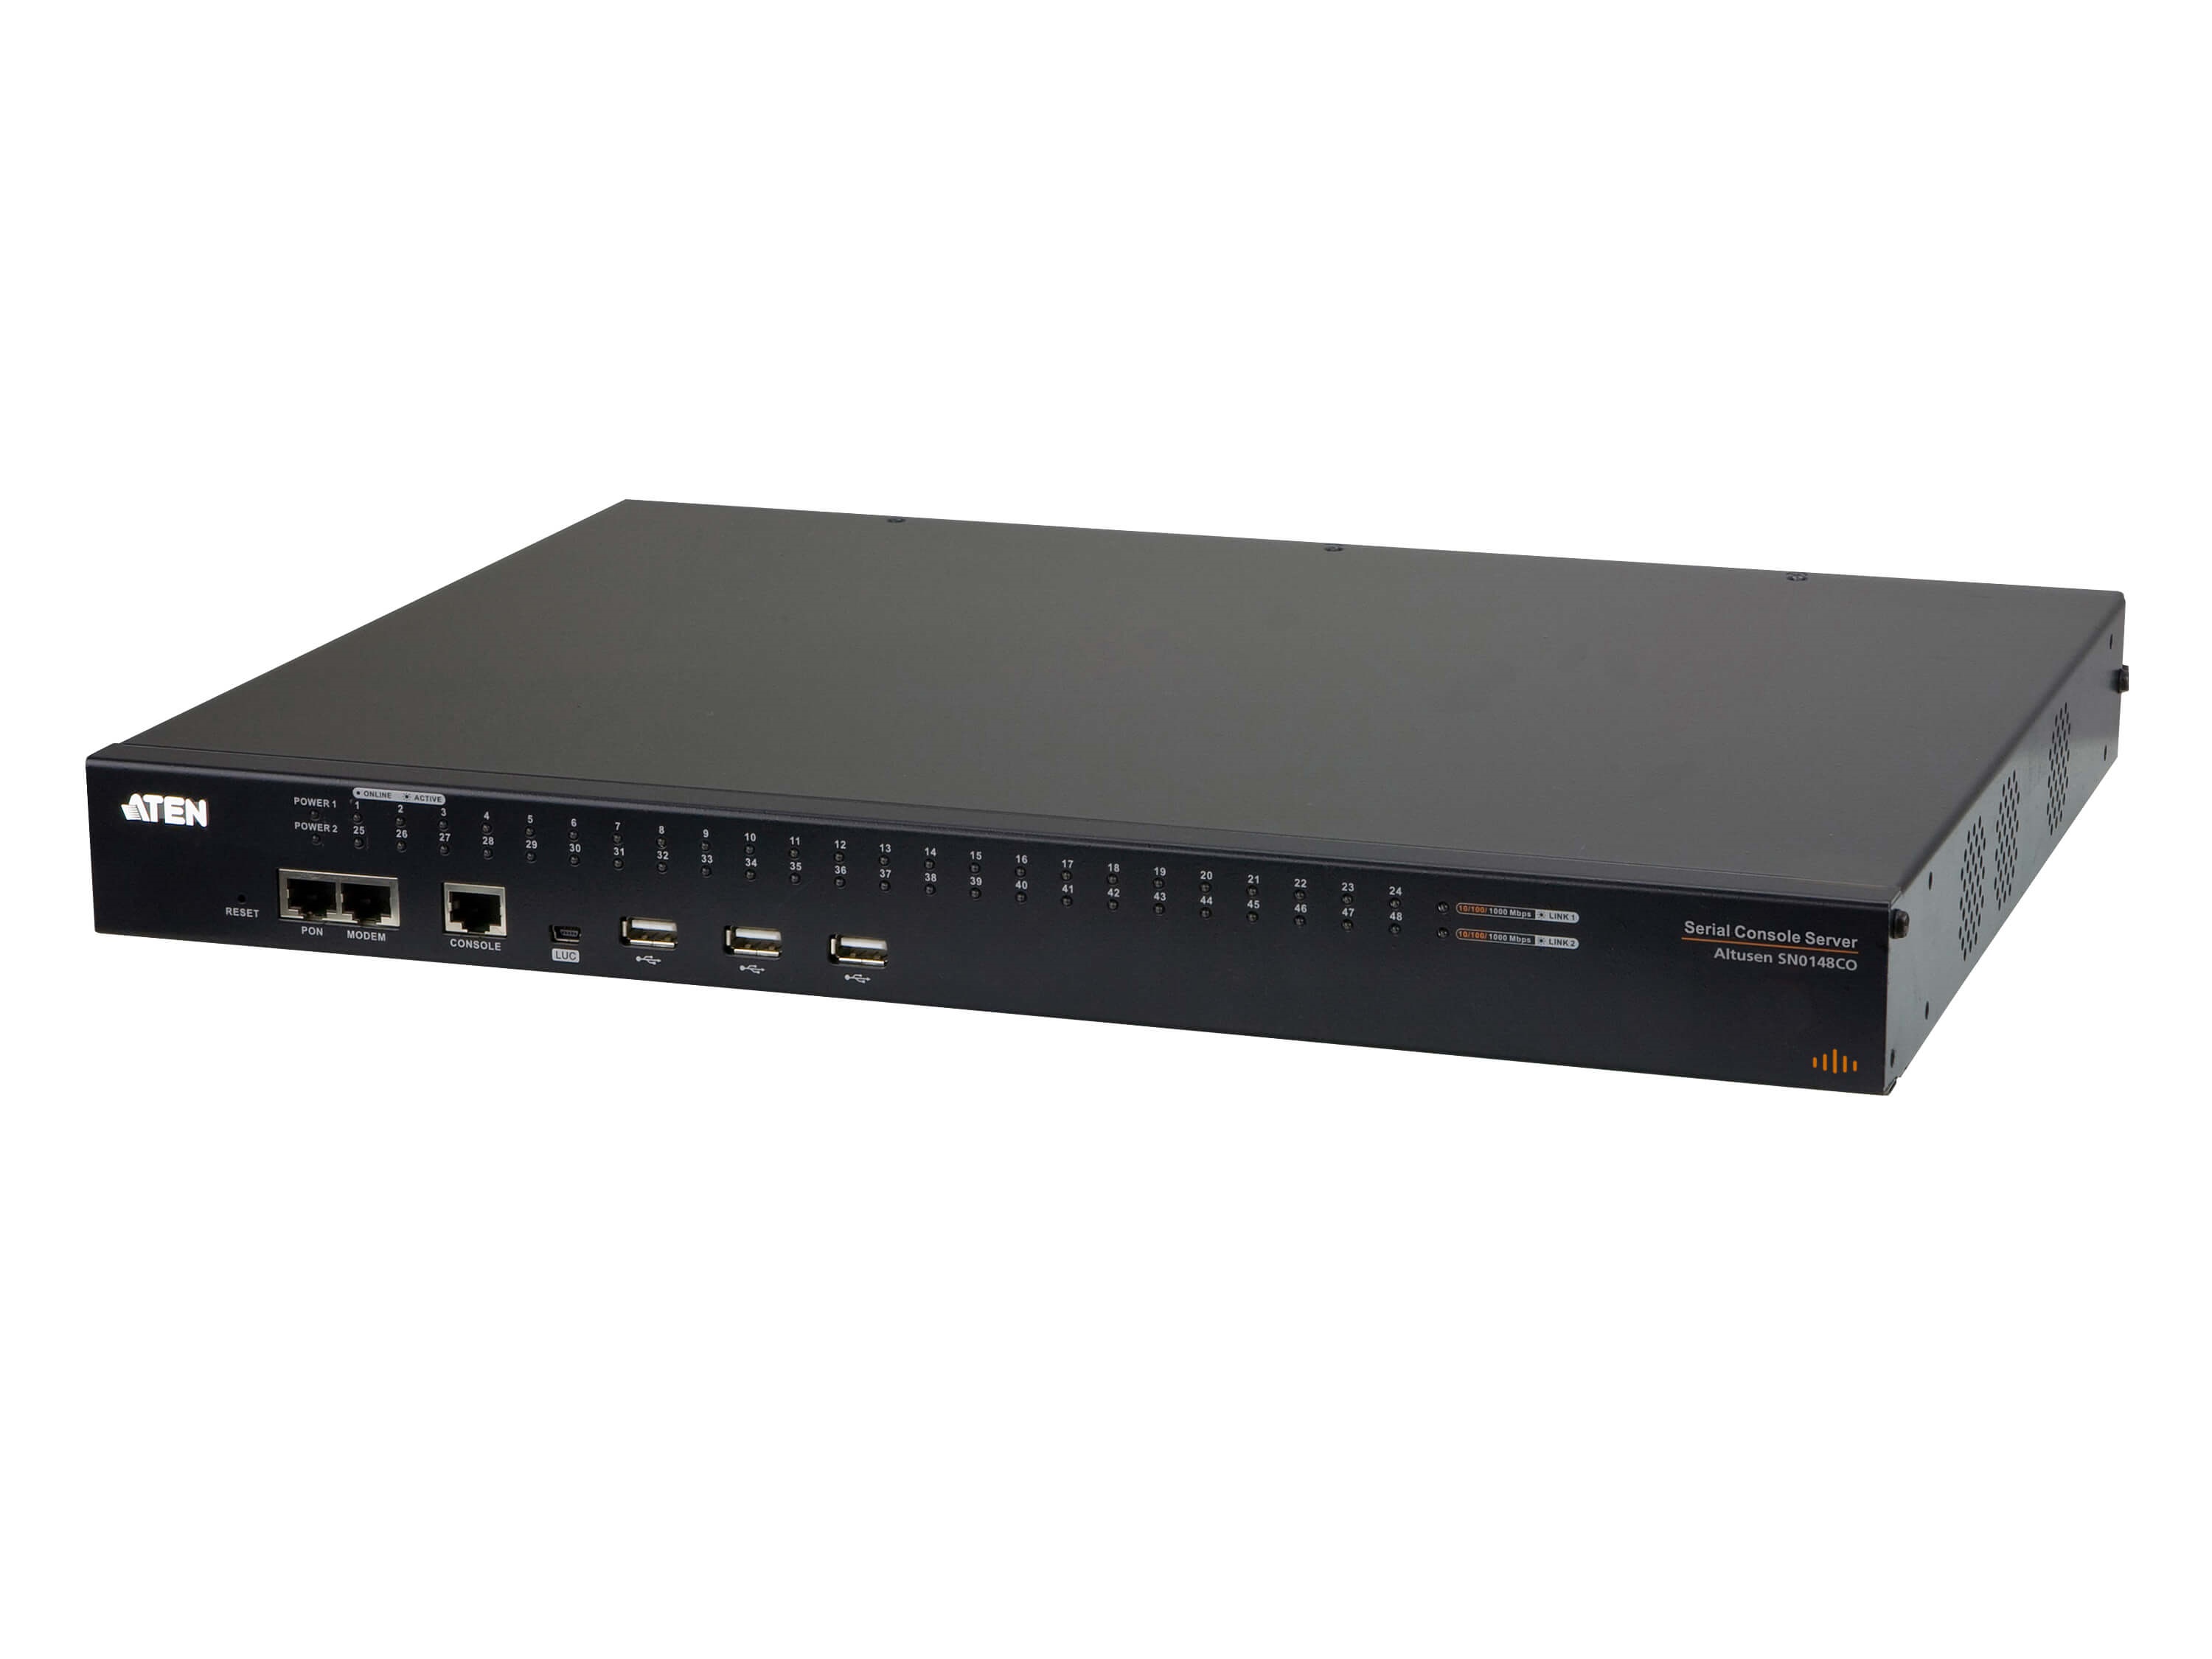 SN0148COD 48-Port Serial Console Server with Dual Power/LAN/DC Power by Aten